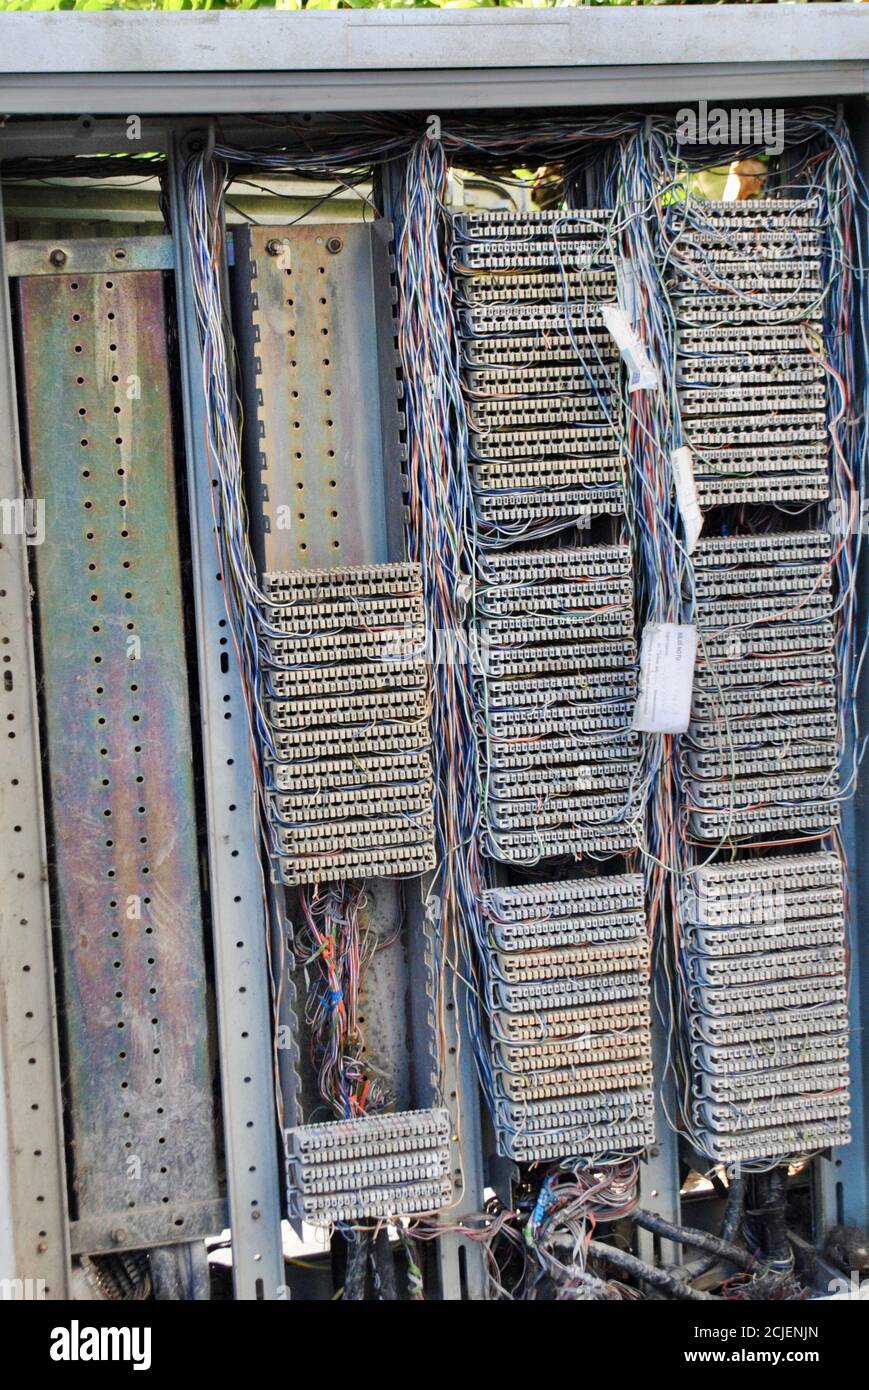 A vertical shot of the opened electric panel box and wires with different colors awaiting for inspection. Industrial electrical concept Stock Photo